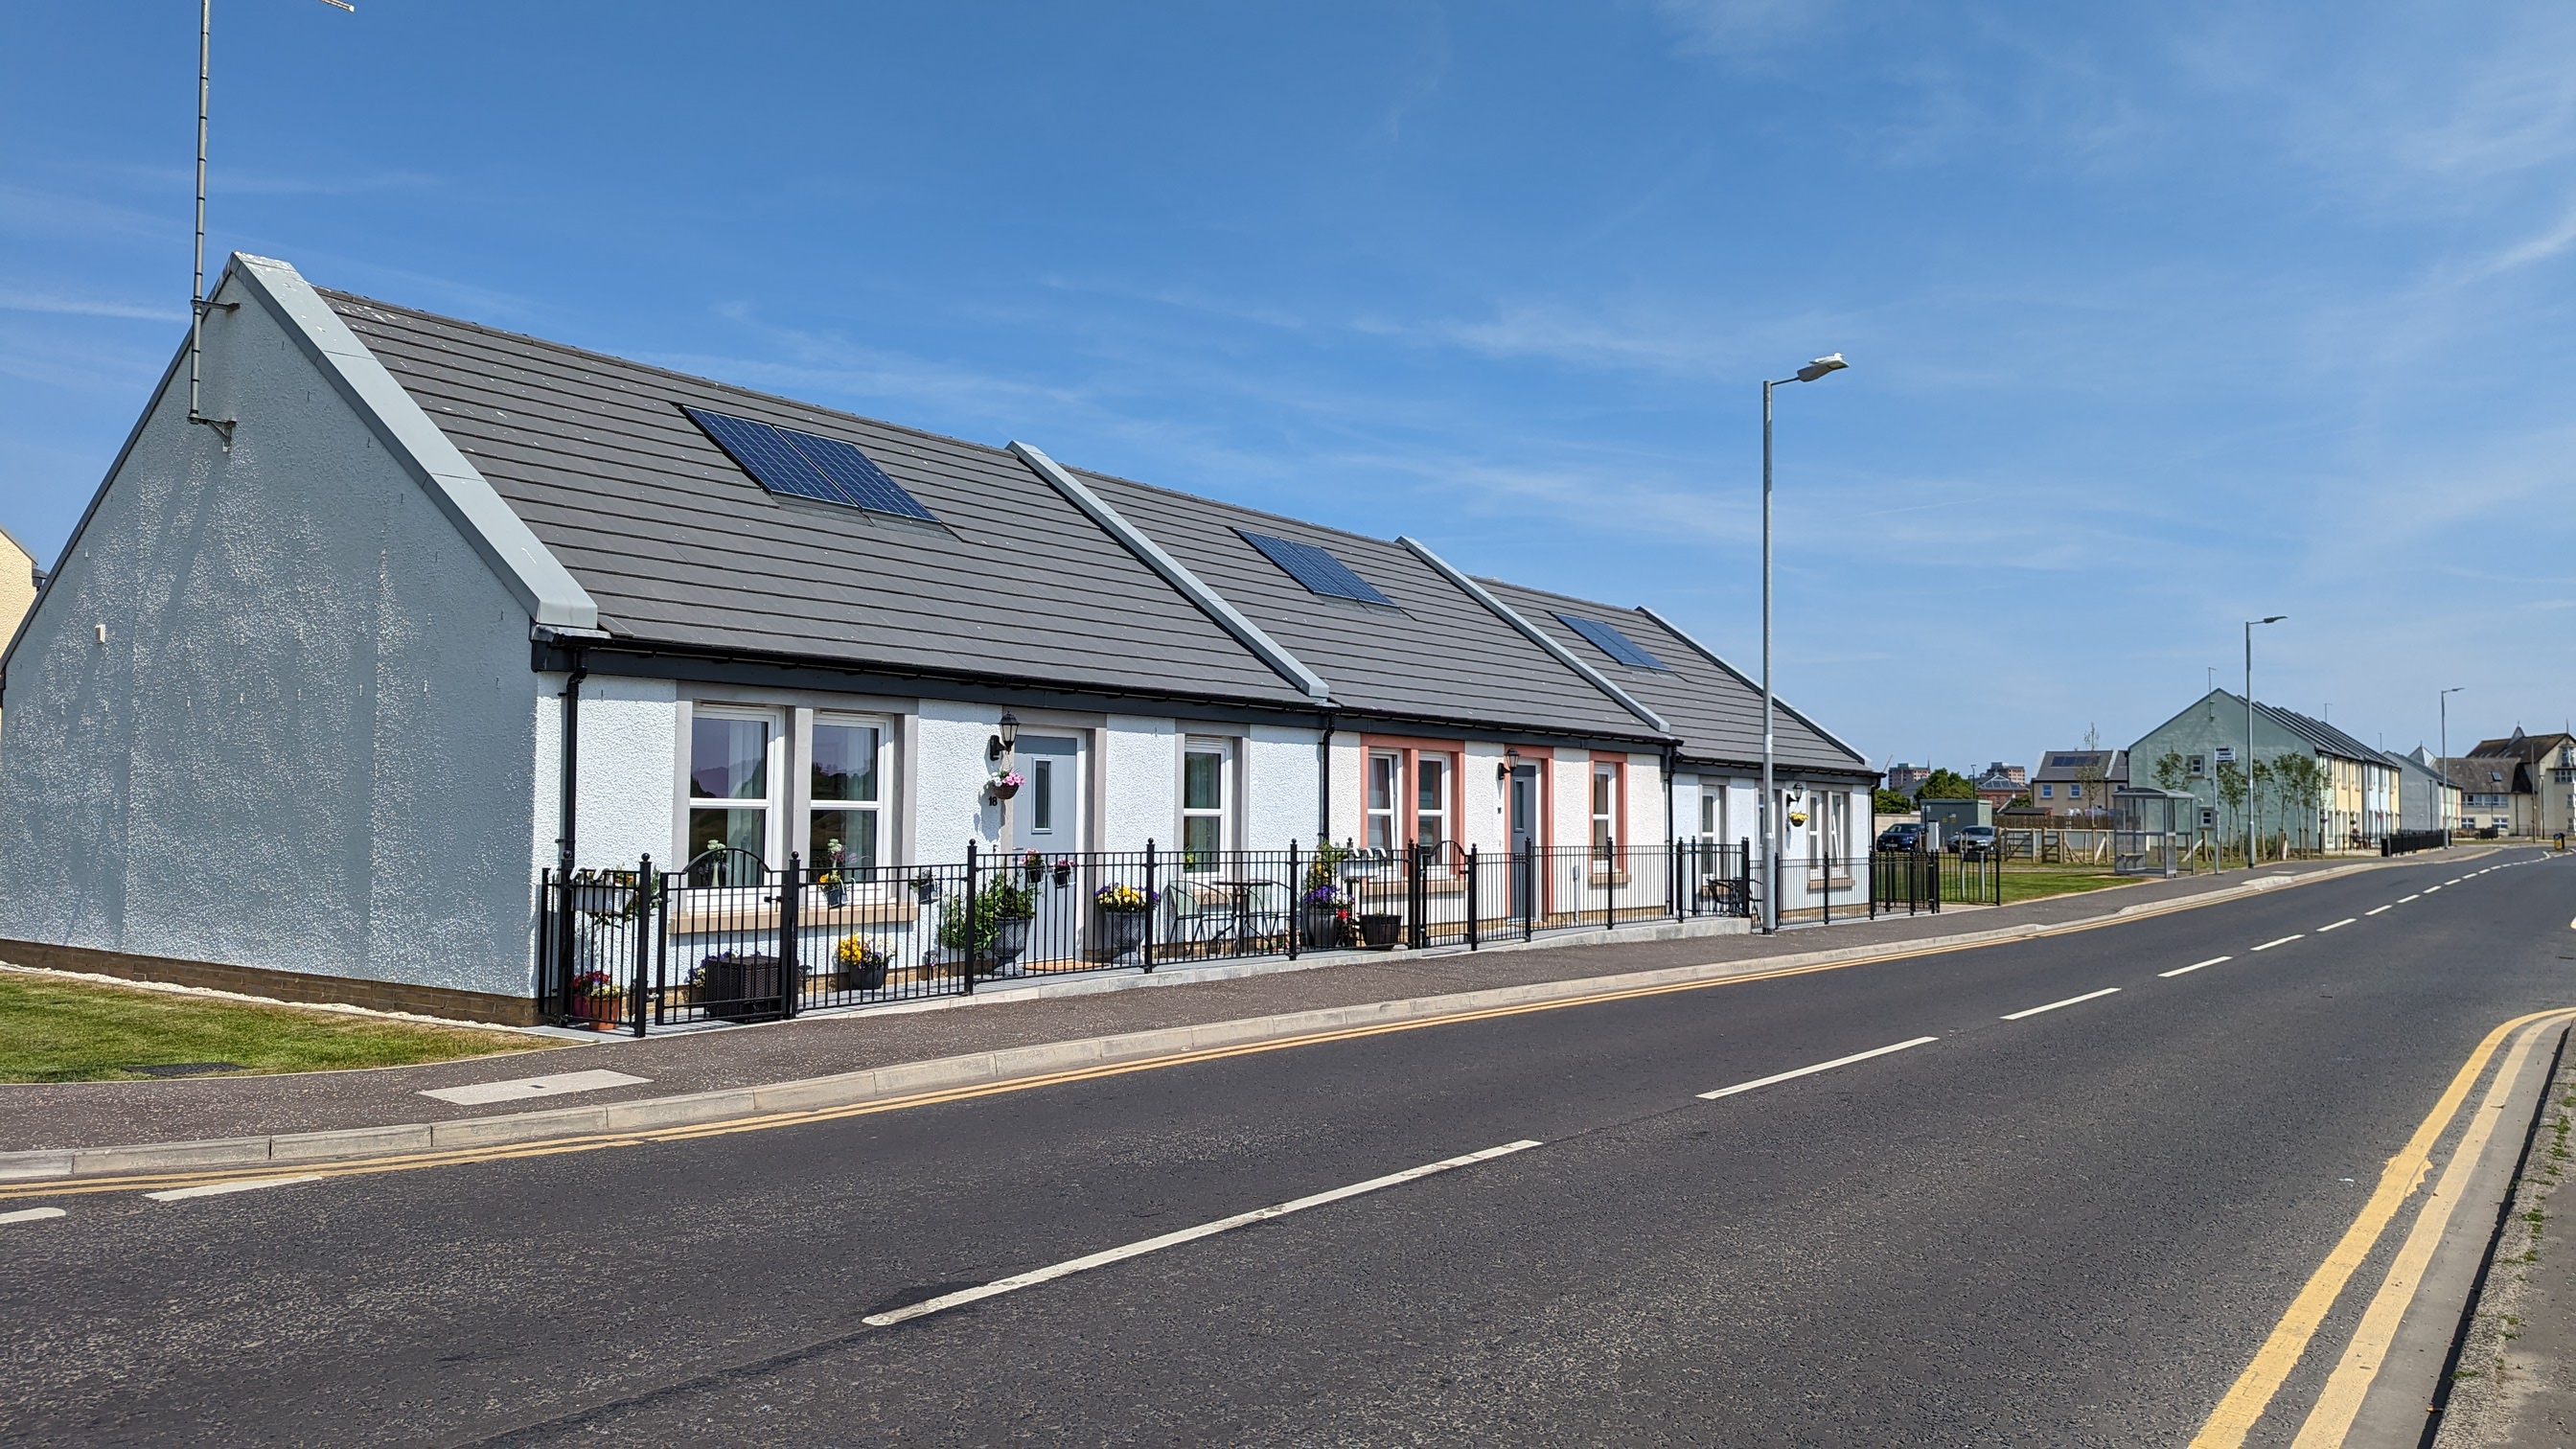 McTaggart delivers 71 new homes at Irvine Harbourside